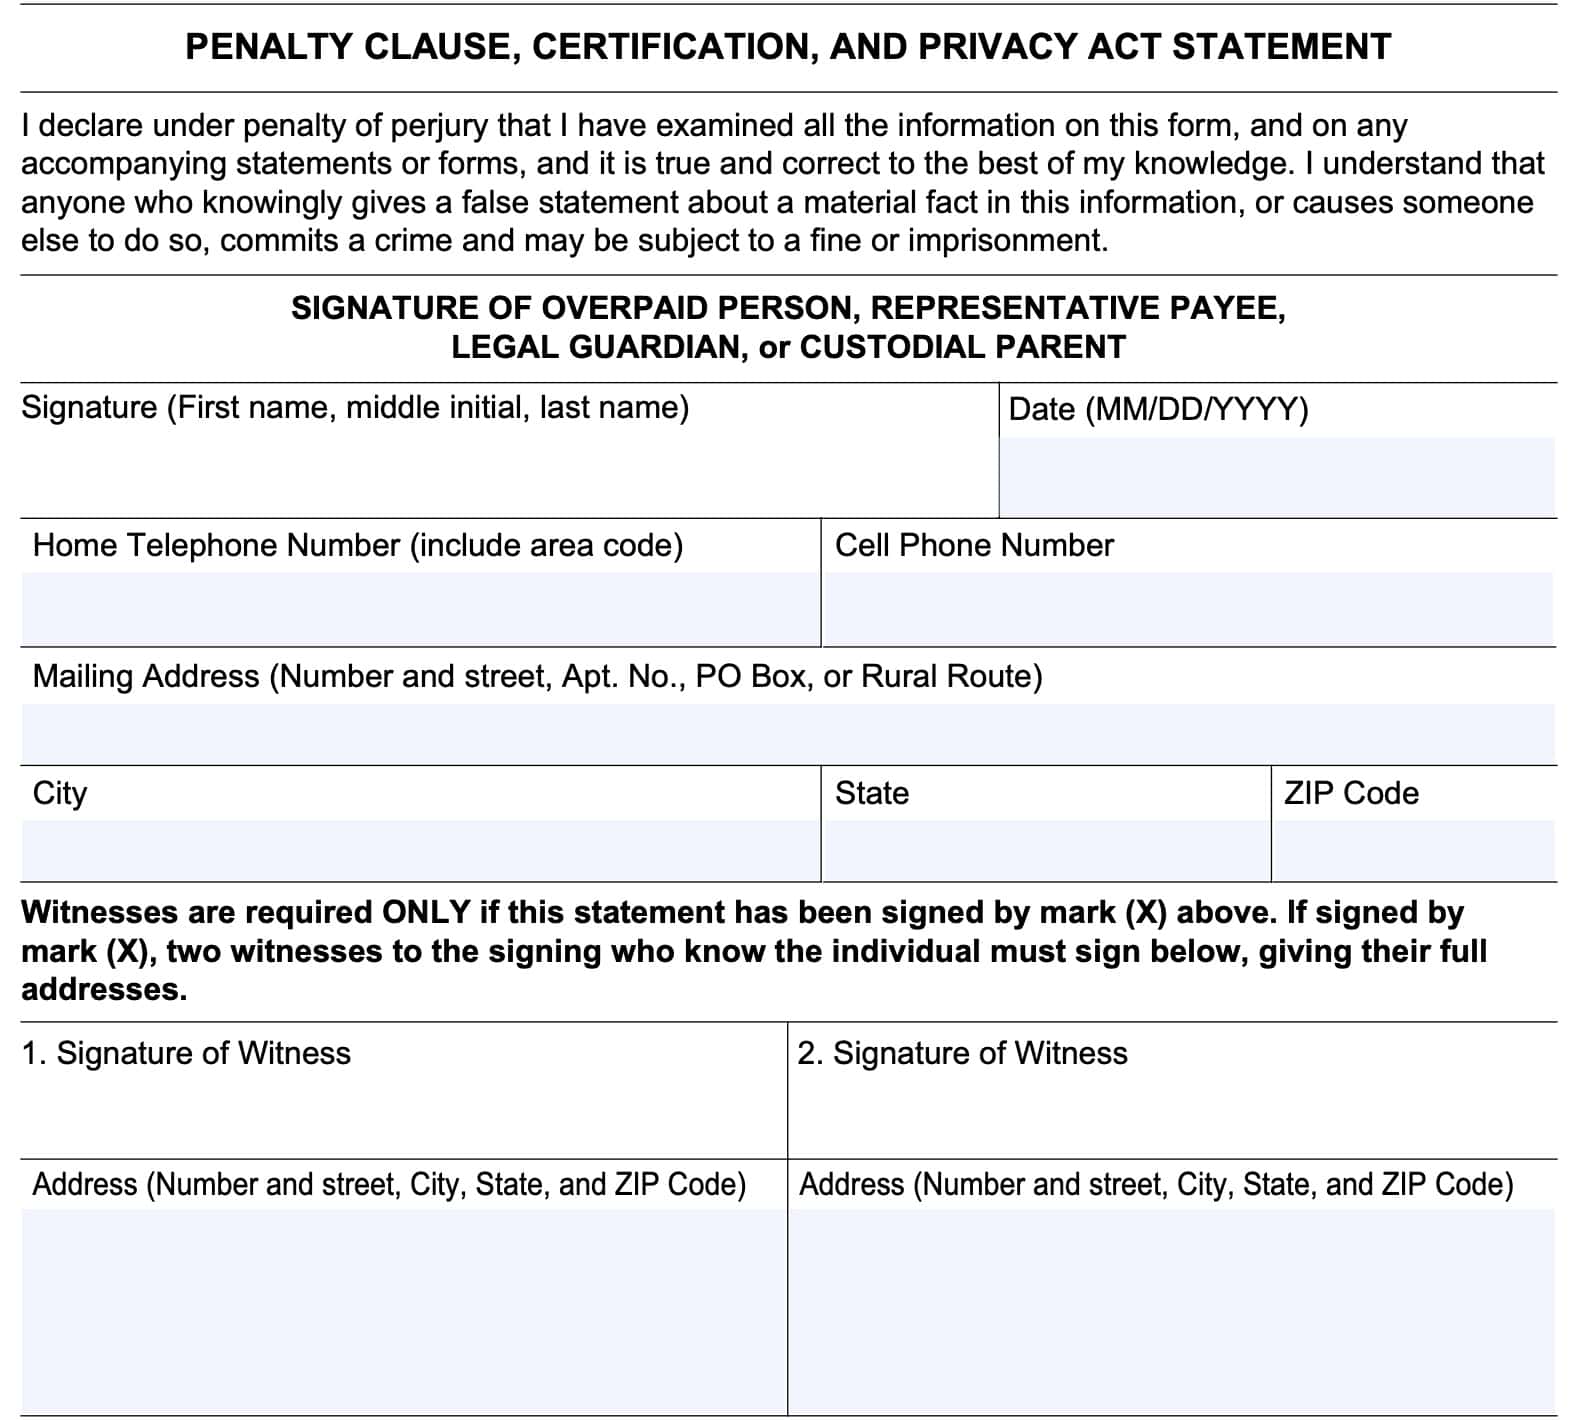 penalty clause, certification, privacy act, and signature